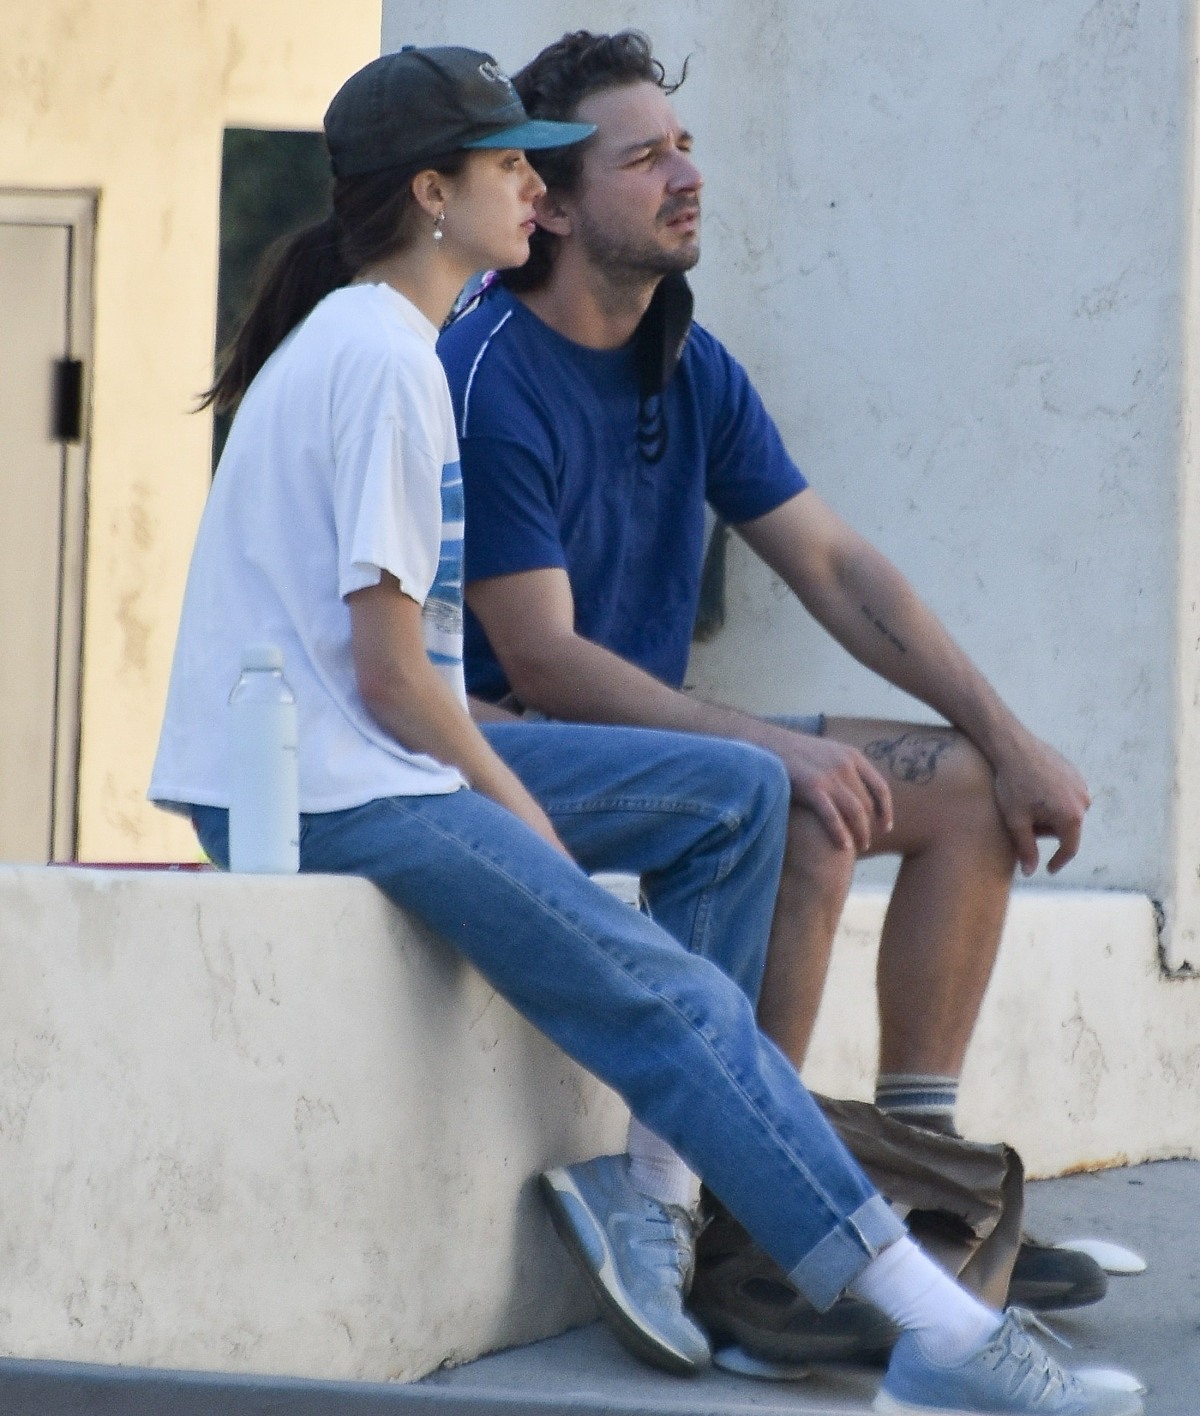 Shia LaBeouf and girlfriend Margaret Qualley picking up food to go